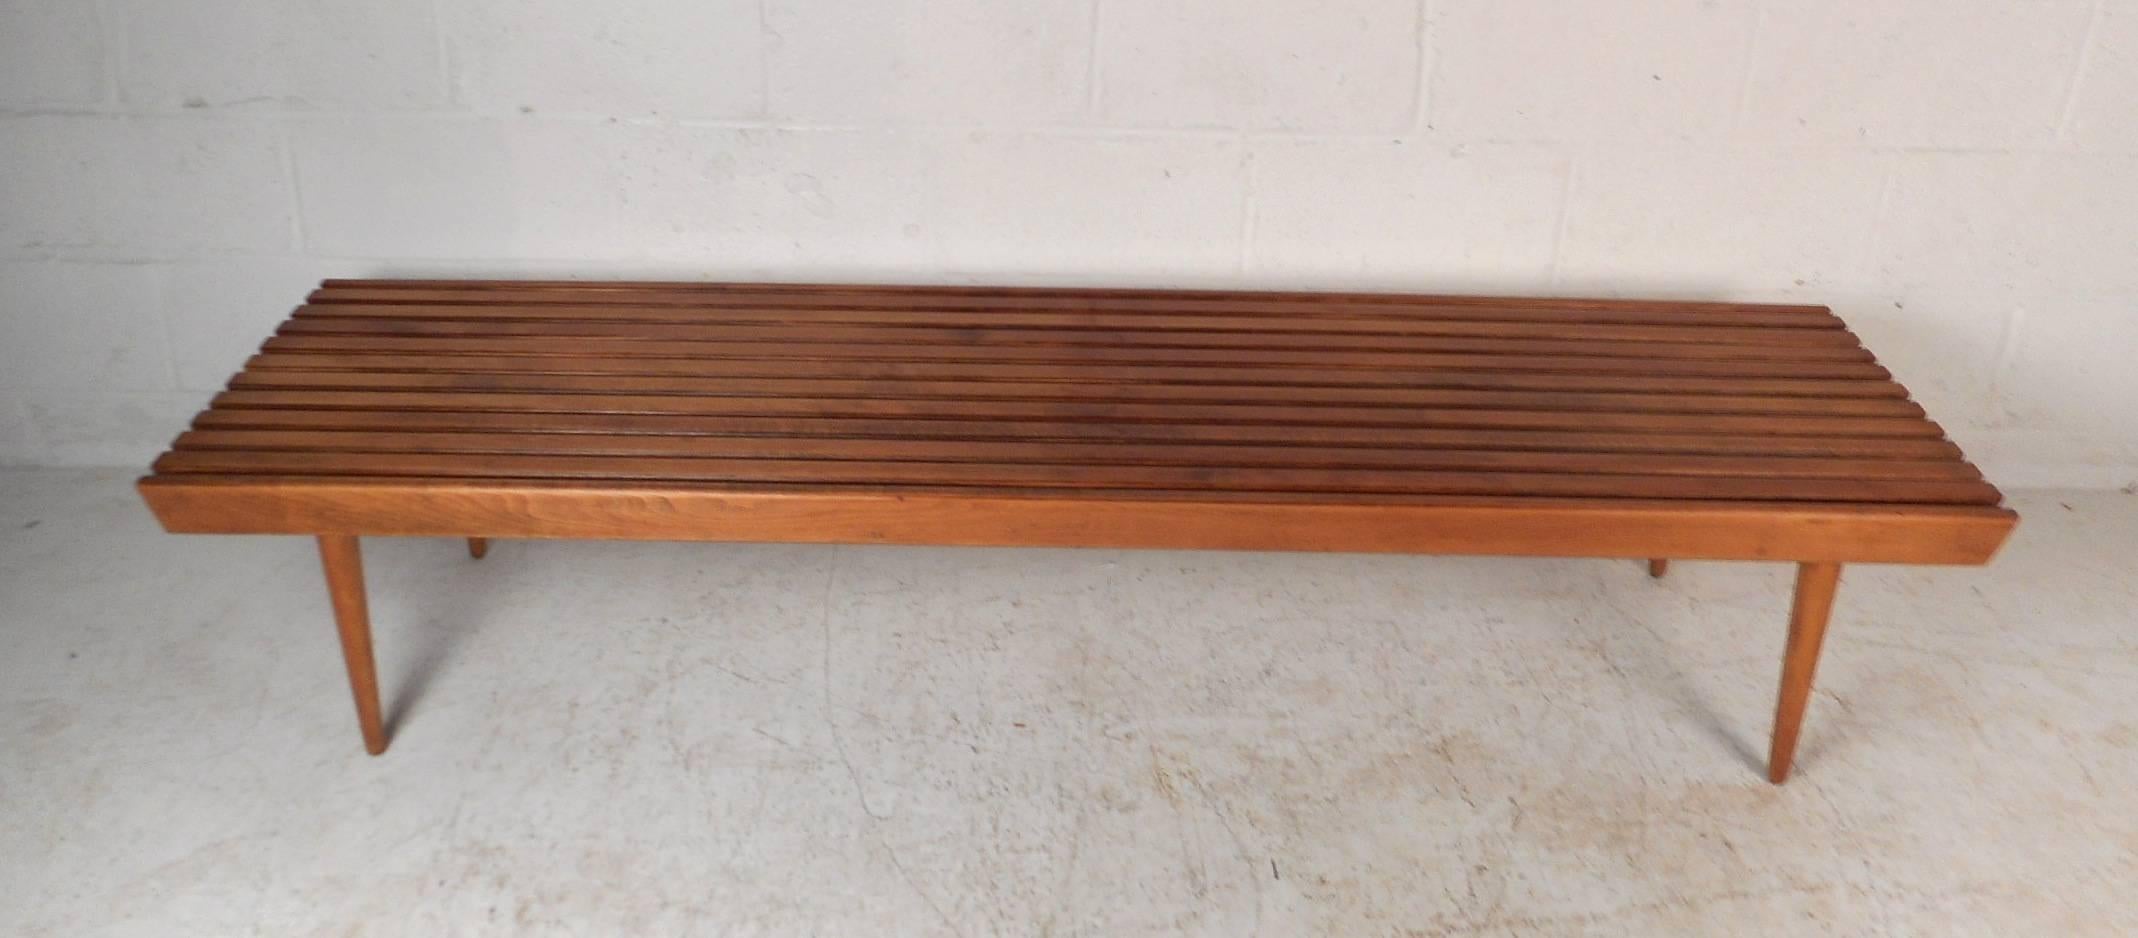 This beautiful vintage modern slat bench is 72 inches wide and features tapered legs. Sturdy construction with a wonderful light walnut finish throughout. This stunning midcentury piece functions as a coffee table or a bench. Perfect addition to any